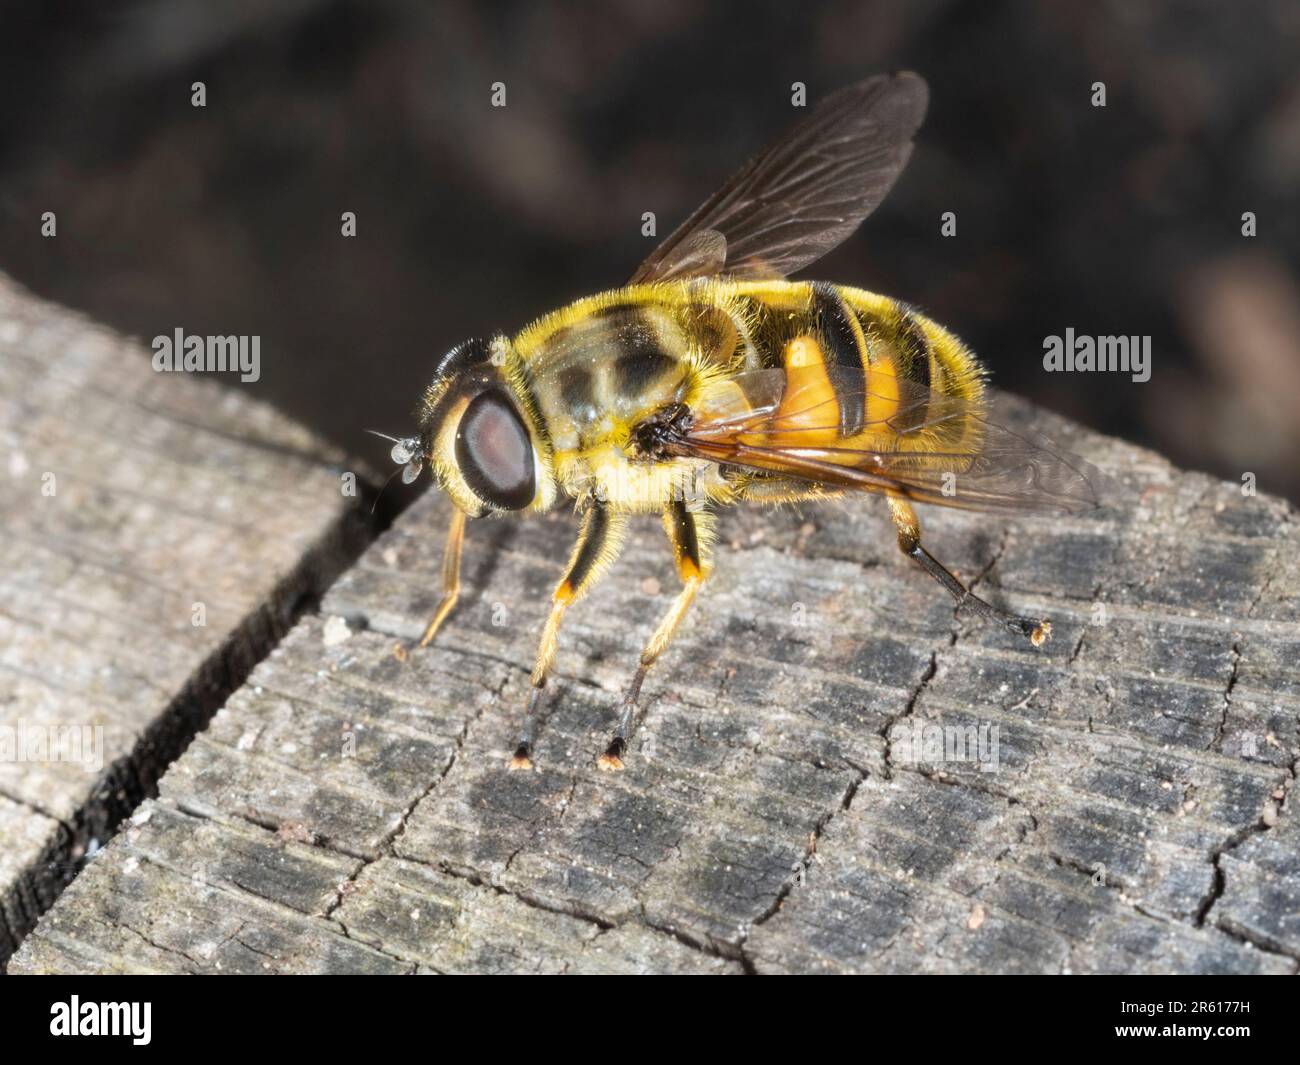 Adult male hoverfly, Myathropa florea, a UK native and garden visitor Stock Photo